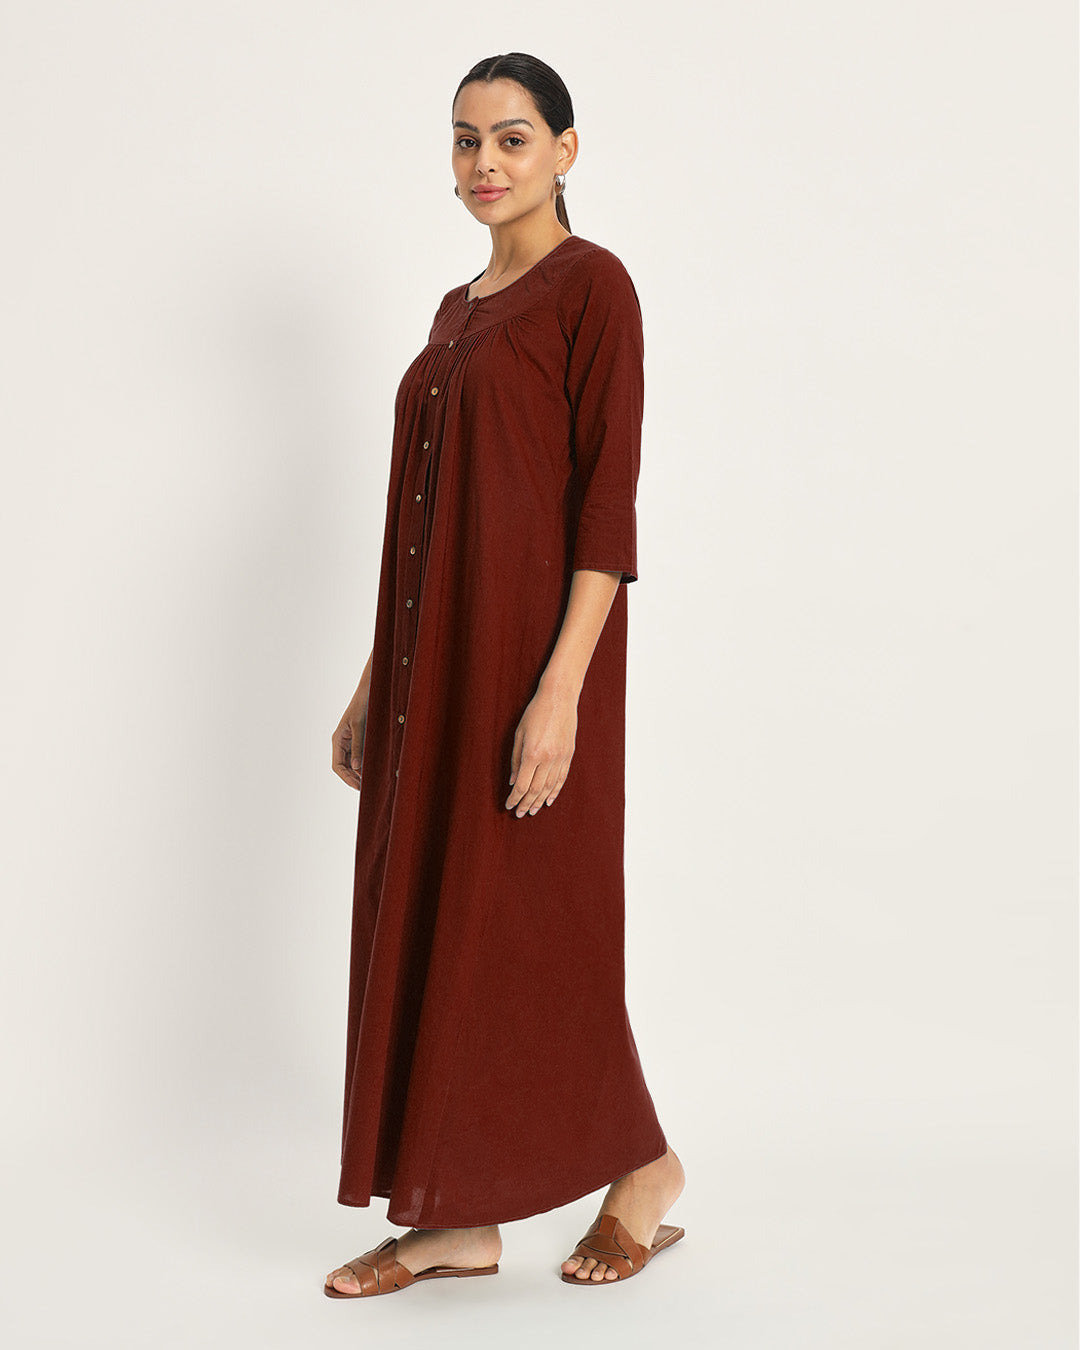 Combo: Iris Pink & Russet Red Nighttime Must-Have Nightdress